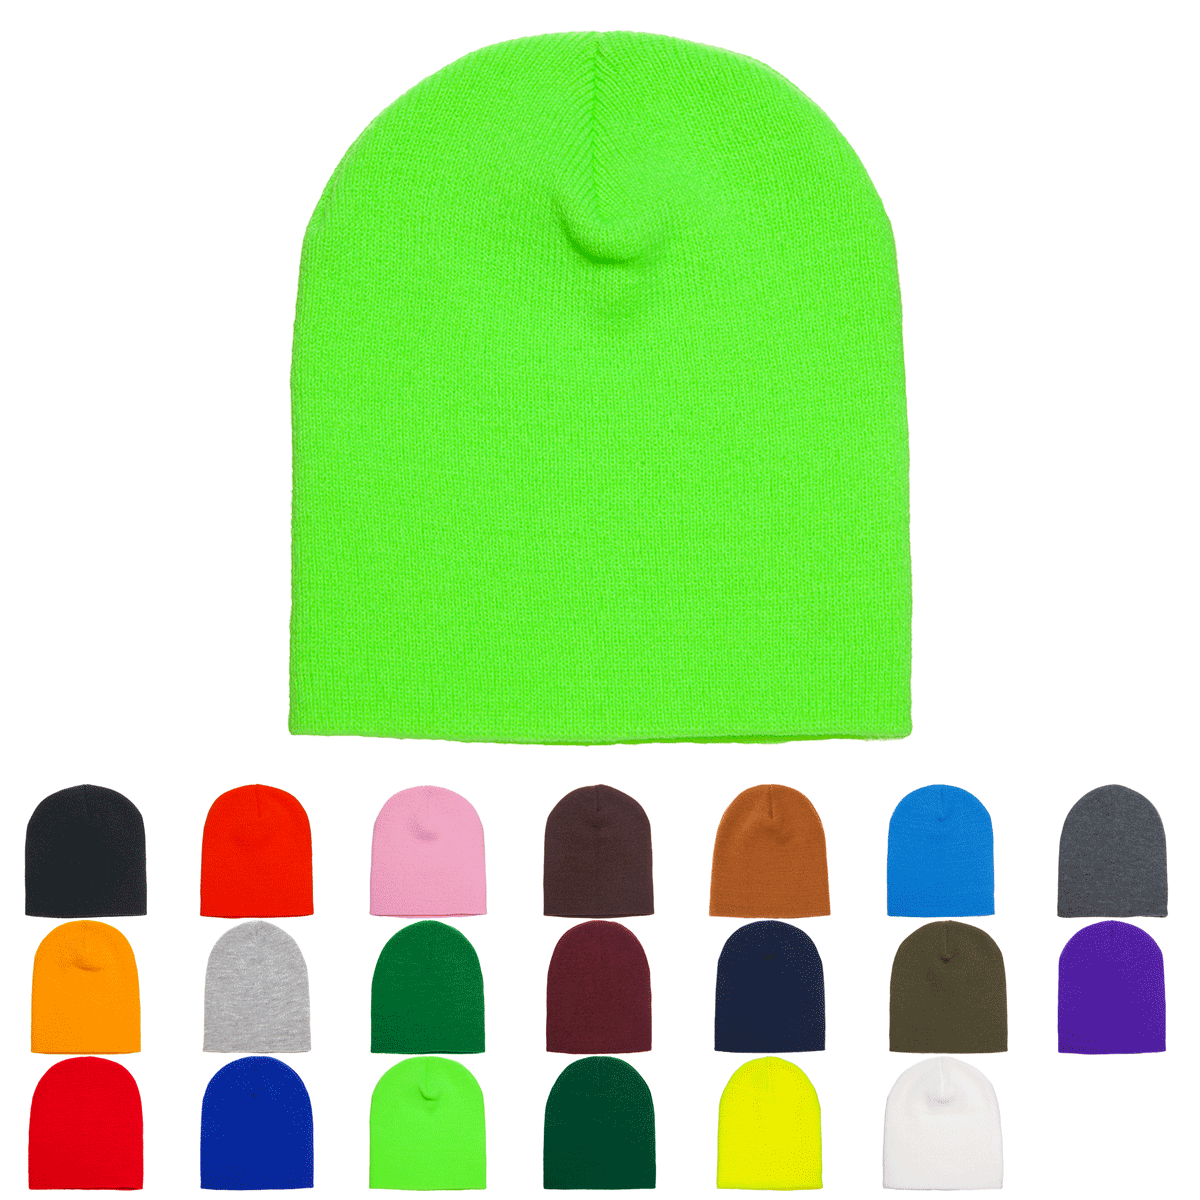 Up To 57% Off on NHL Beanies Knit Hats - Multi